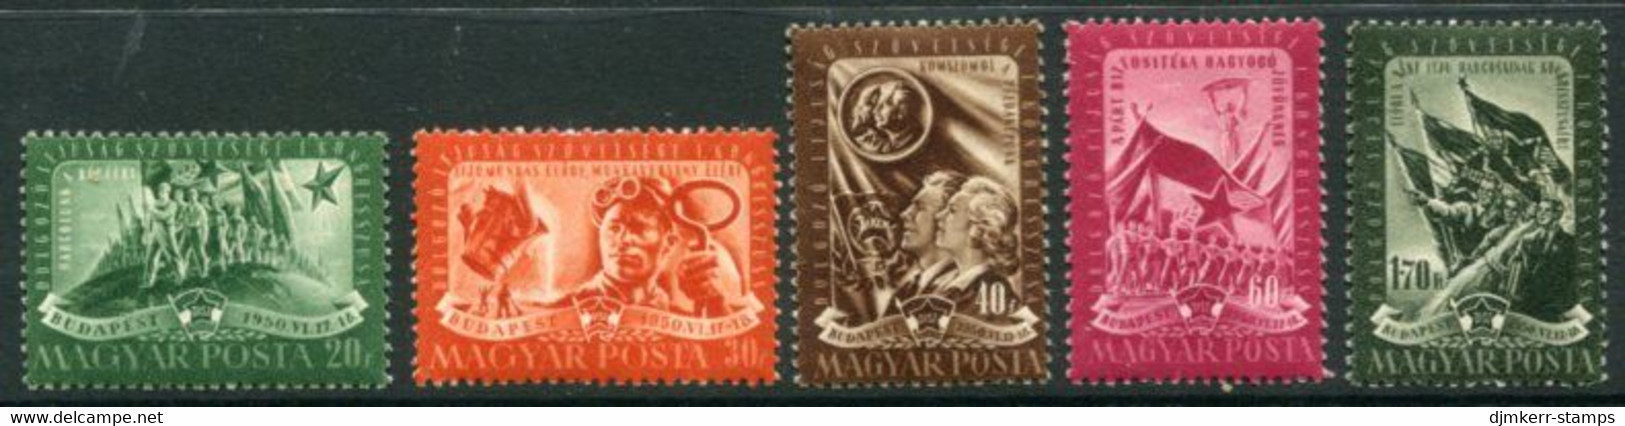 HUNGARY 1950 Young Workers' Congress LHM / *.  Michel 1106-10 - Unused Stamps